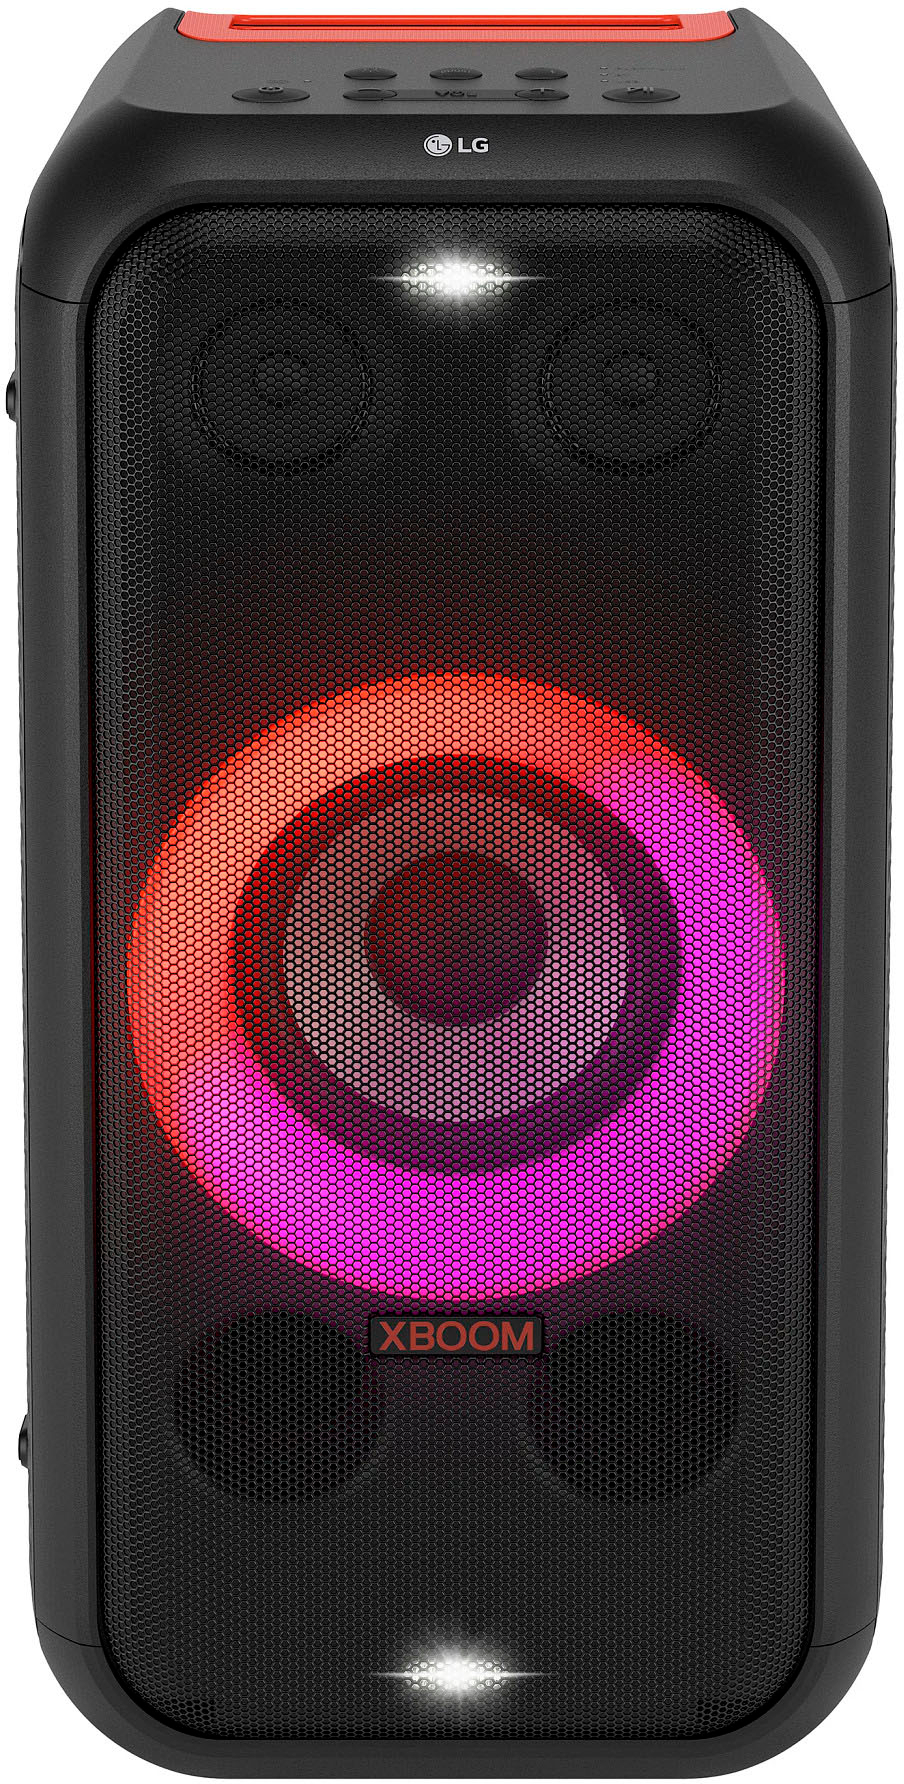 LG XBOOM XL5 Portable Tower Party Speaker with LED Lighting Black 